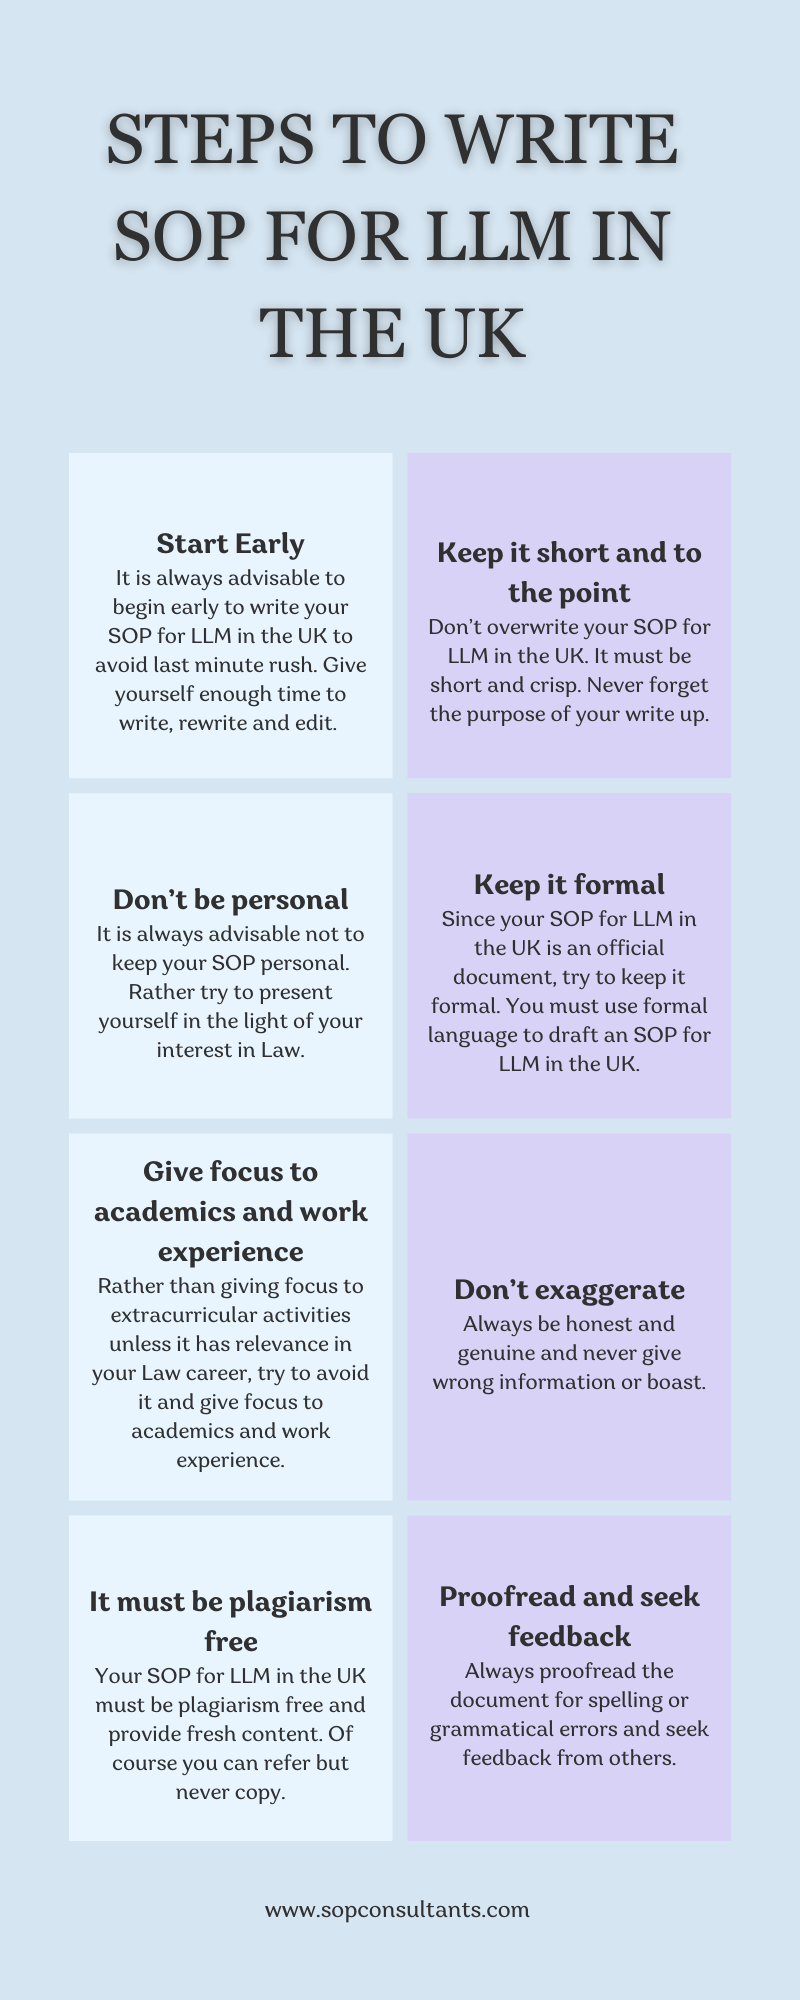 how to write sop for llm in uk - infographics complete steps